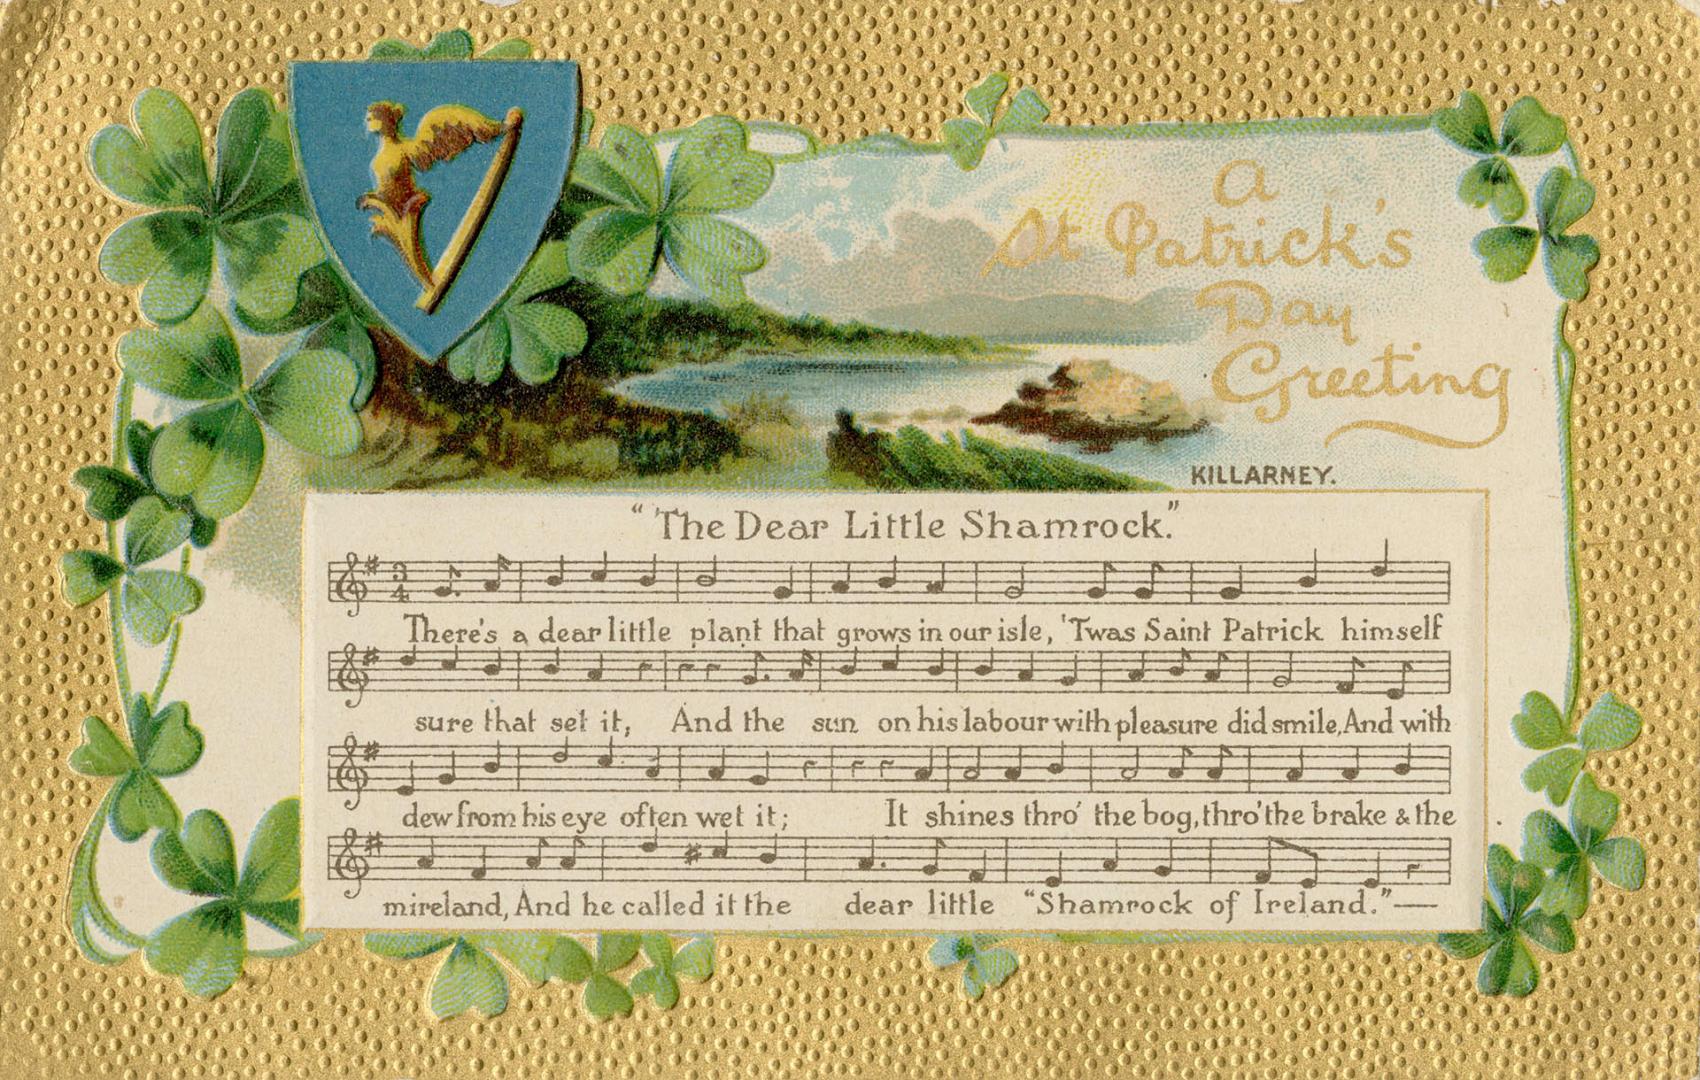 A St Patrick's day greeting